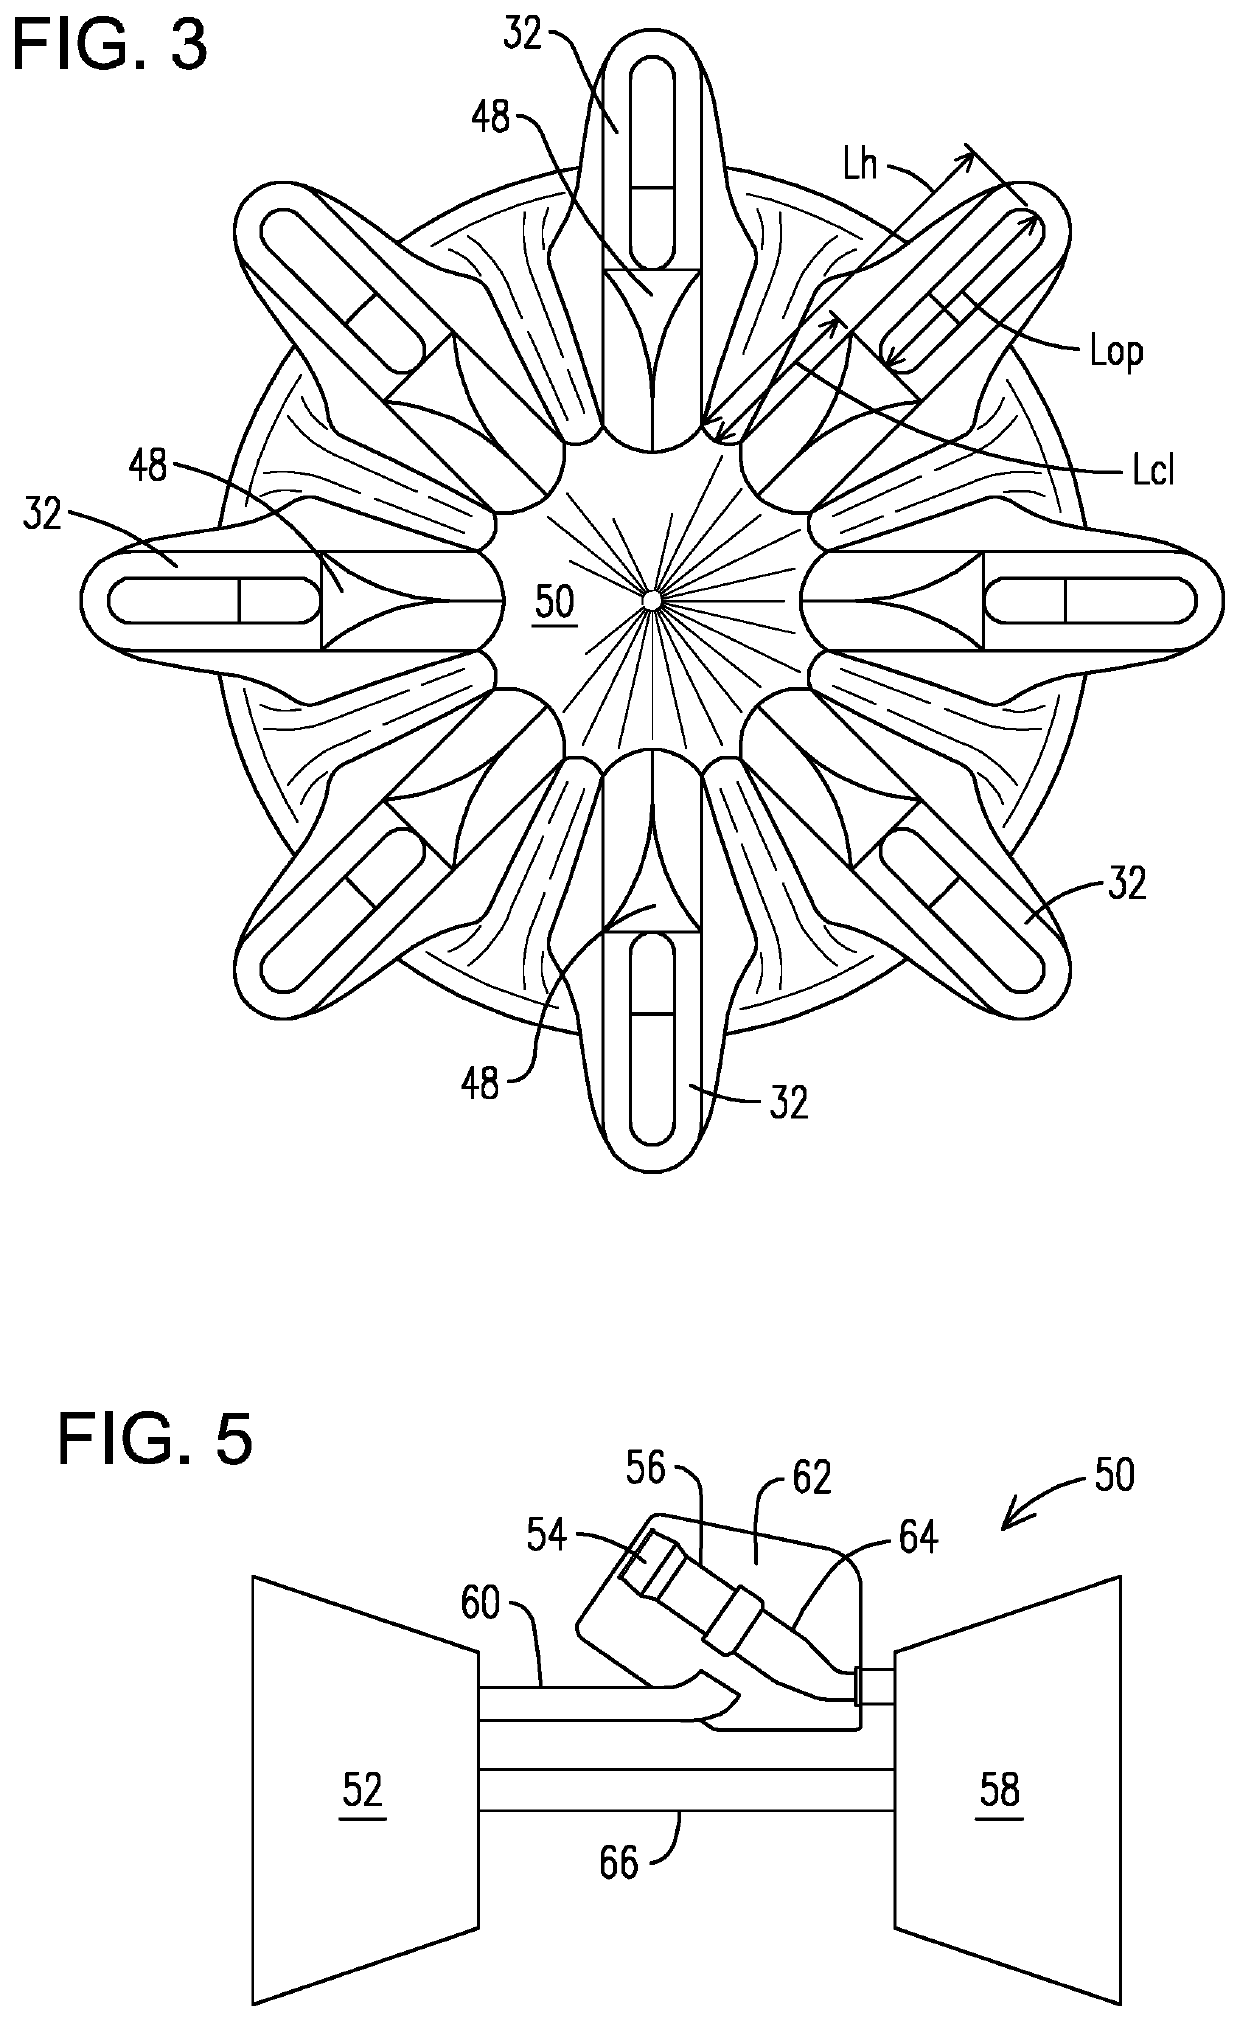 Fuel injector including a lobed mixer and vanes for injecting alternate fuels in a gas turbine